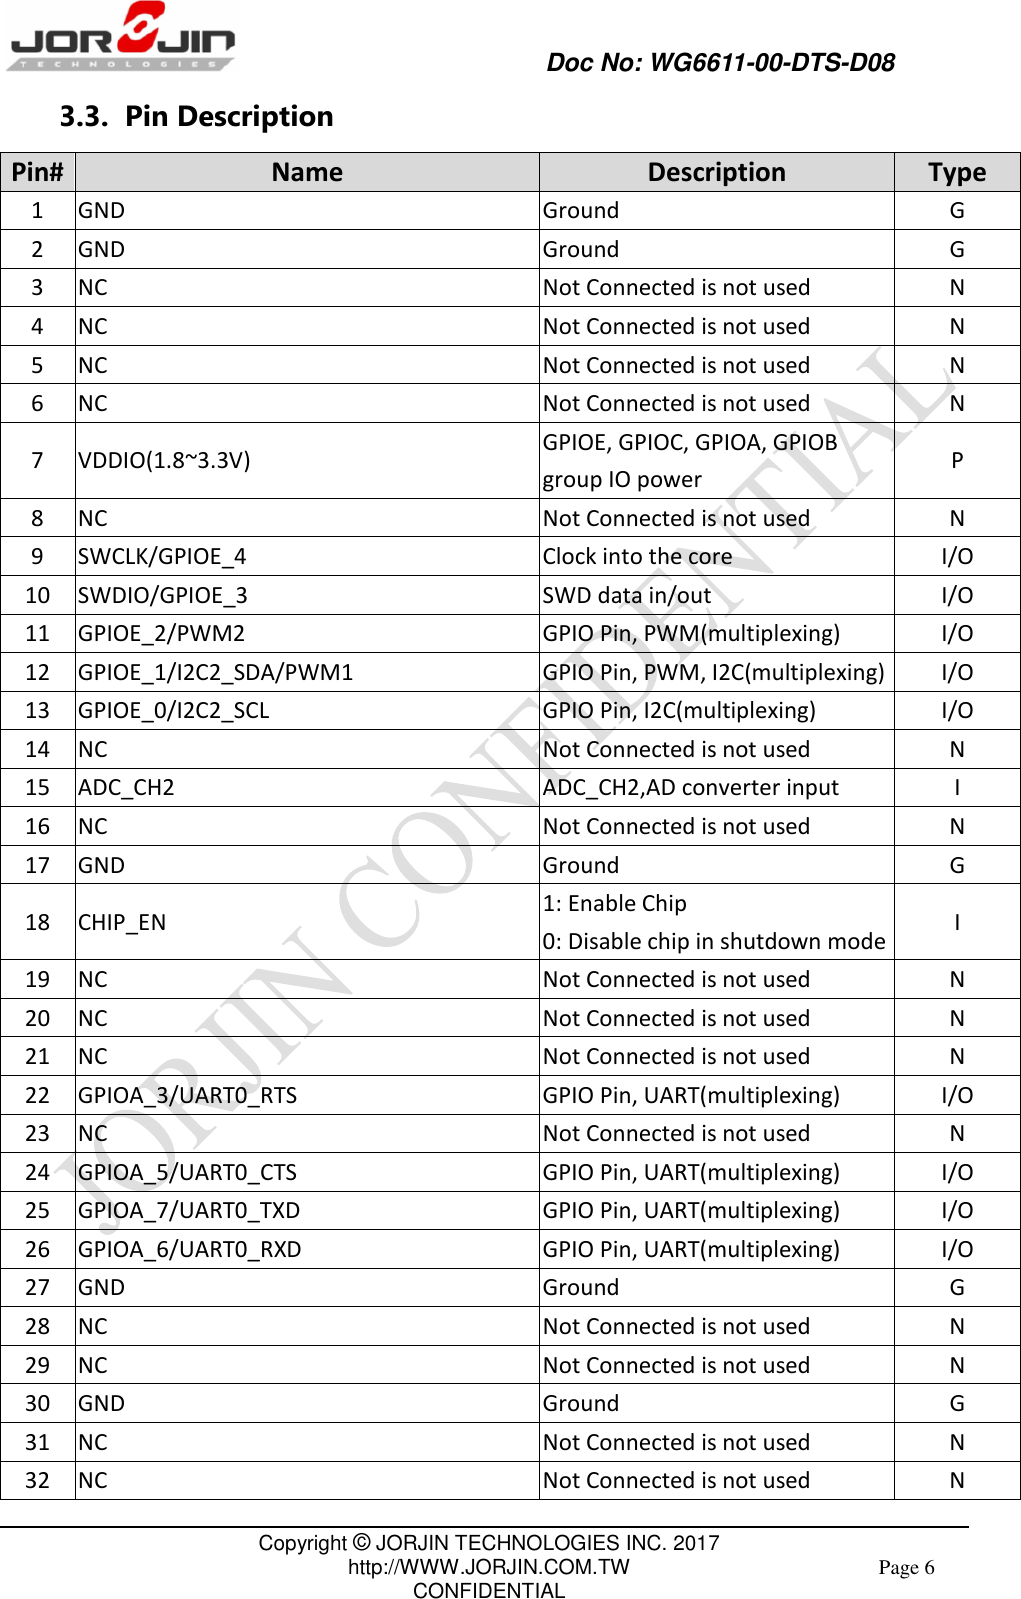             Doc No: WG6611-00-DTS-D08                                                                                               Copyright © JORJIN TECHNOLOGIES INC. 2017 http://WWW.JORJIN.COM.TW CONFIDENTIAL Page 6 3.3.  Pin Description Pin# Name Description Type 1 GND Ground G 2 GND Ground G 3 NC Not Connected is not used N 4 NC Not Connected is not used N 5 NC Not Connected is not used N 6 NC Not Connected is not used N 7 VDDIO(1.8~3.3V) GPIOE, GPIOC, GPIOA, GPIOB group IO power P 8 NC Not Connected is not used N 9 SWCLK/GPIOE_4 Clock into the core I/O 10 SWDIO/GPIOE_3 SWD data in/out I/O 11 GPIOE_2/PWM2 GPIO Pin, PWM(multiplexing) I/O 12 GPIOE_1/I2C2_SDA/PWM1 GPIO Pin, PWM, I2C(multiplexing) I/O 13 GPIOE_0/I2C2_SCL GPIO Pin, I2C(multiplexing) I/O 14 NC Not Connected is not used N   15 ADC_CH2 ADC_CH2,AD converter input I 16 NC Not Connected is not used N 17 GND Ground G 18 CHIP_EN 1: Enable Chip 0: Disable chip in shutdown mode I 19 NC Not Connected is not used N 20 NC Not Connected is not used N 21 NC Not Connected is not used N 22 GPIOA_3/UART0_RTS GPIO Pin, UART(multiplexing) I/O 23 NC Not Connected is not used N 24 GPIOA_5/UART0_CTS GPIO Pin, UART(multiplexing) I/O 25 GPIOA_7/UART0_TXD GPIO Pin, UART(multiplexing) I/O 26 GPIOA_6/UART0_RXD GPIO Pin, UART(multiplexing) I/O 27 GND Ground G 28 NC Not Connected is not used N 29 NC Not Connected is not used N 30 GND Ground G 31 NC Not Connected is not used N 32 NC Not Connected is not used N 